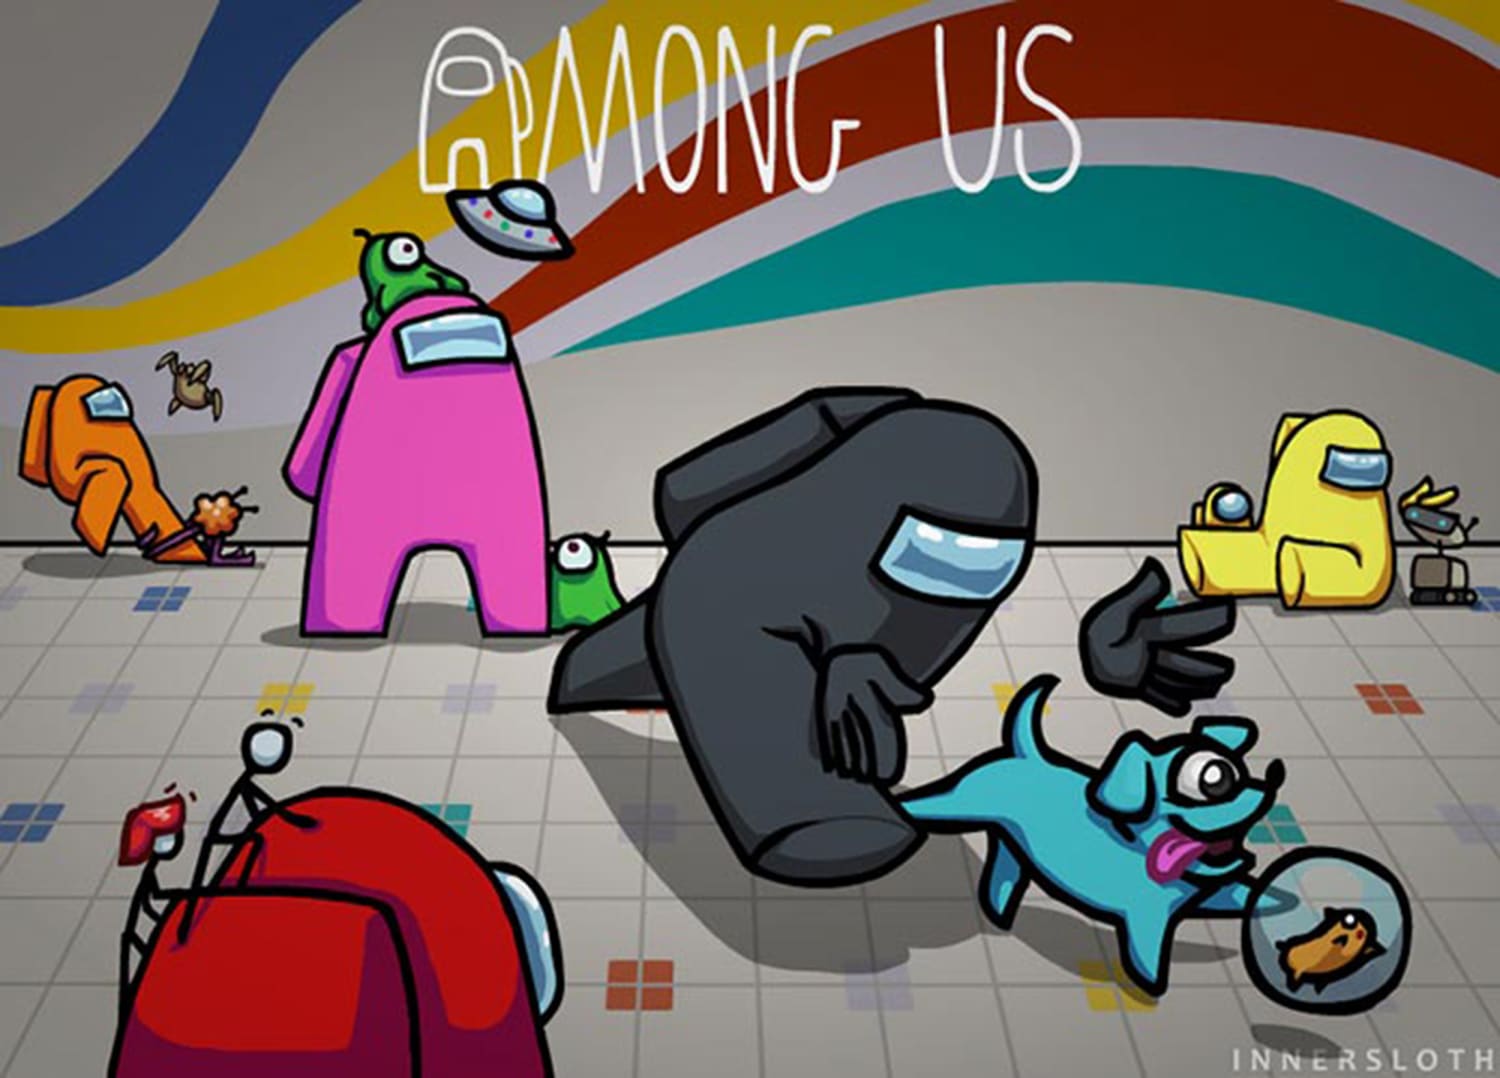 Among Us: Everything You Need to Know About the Game That Makes Everyone  Feel 'Sus' - News18